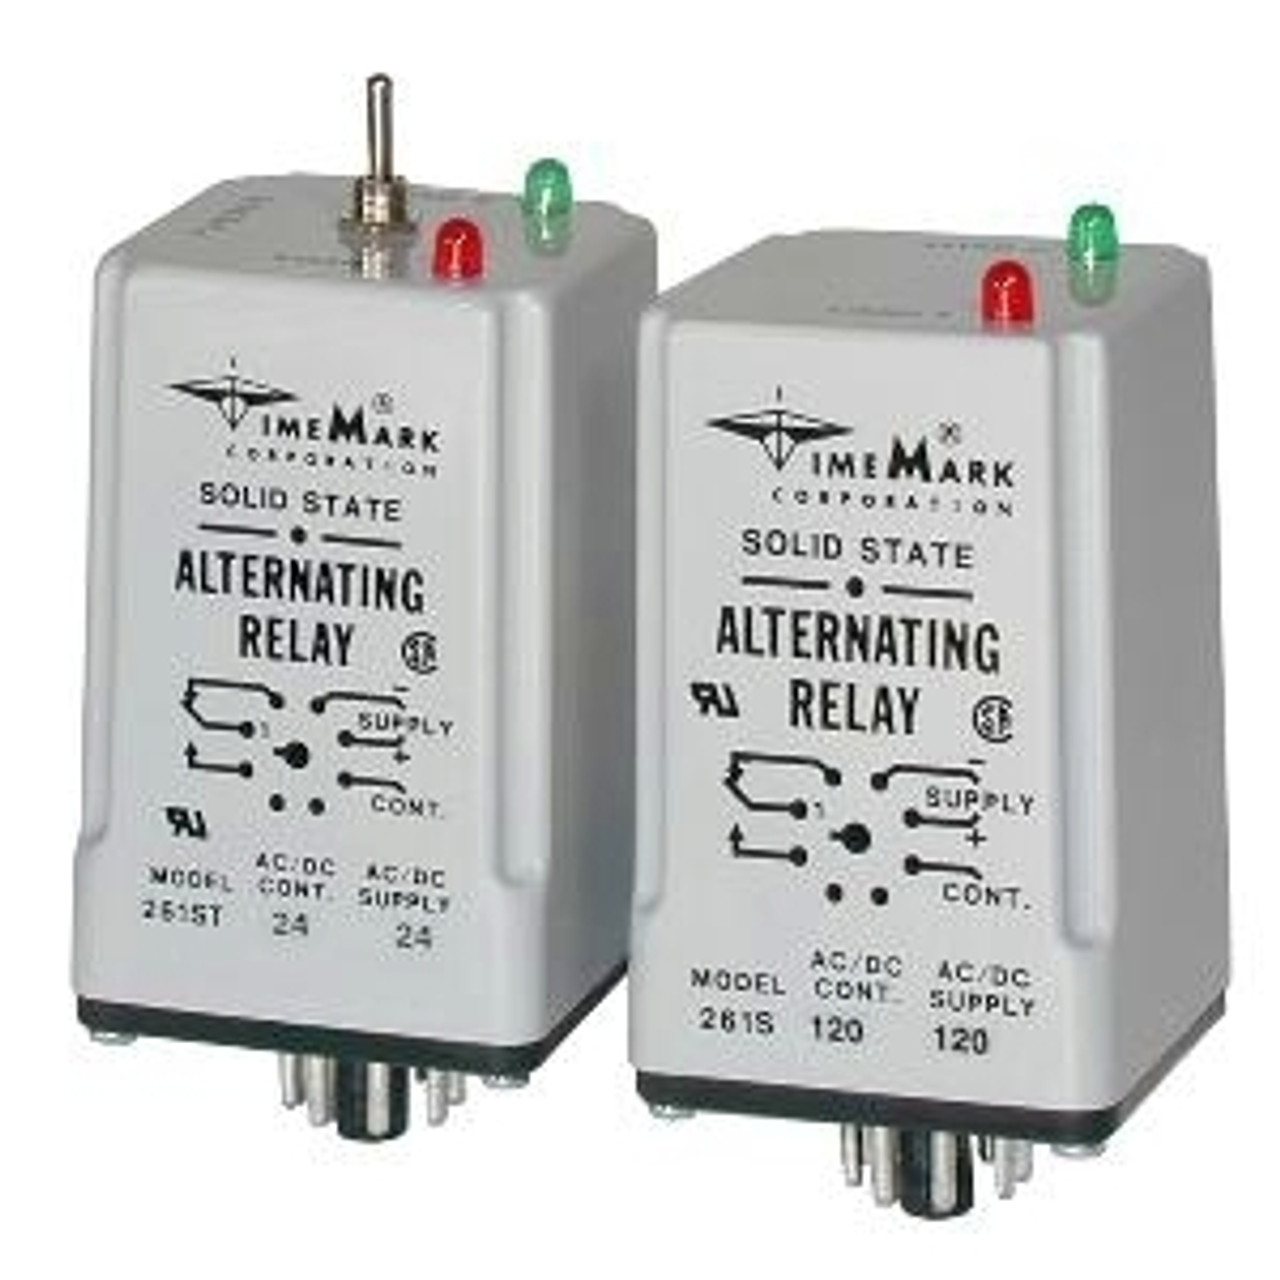 TimeMark 261-S-24 Alternating Sequencing Relay